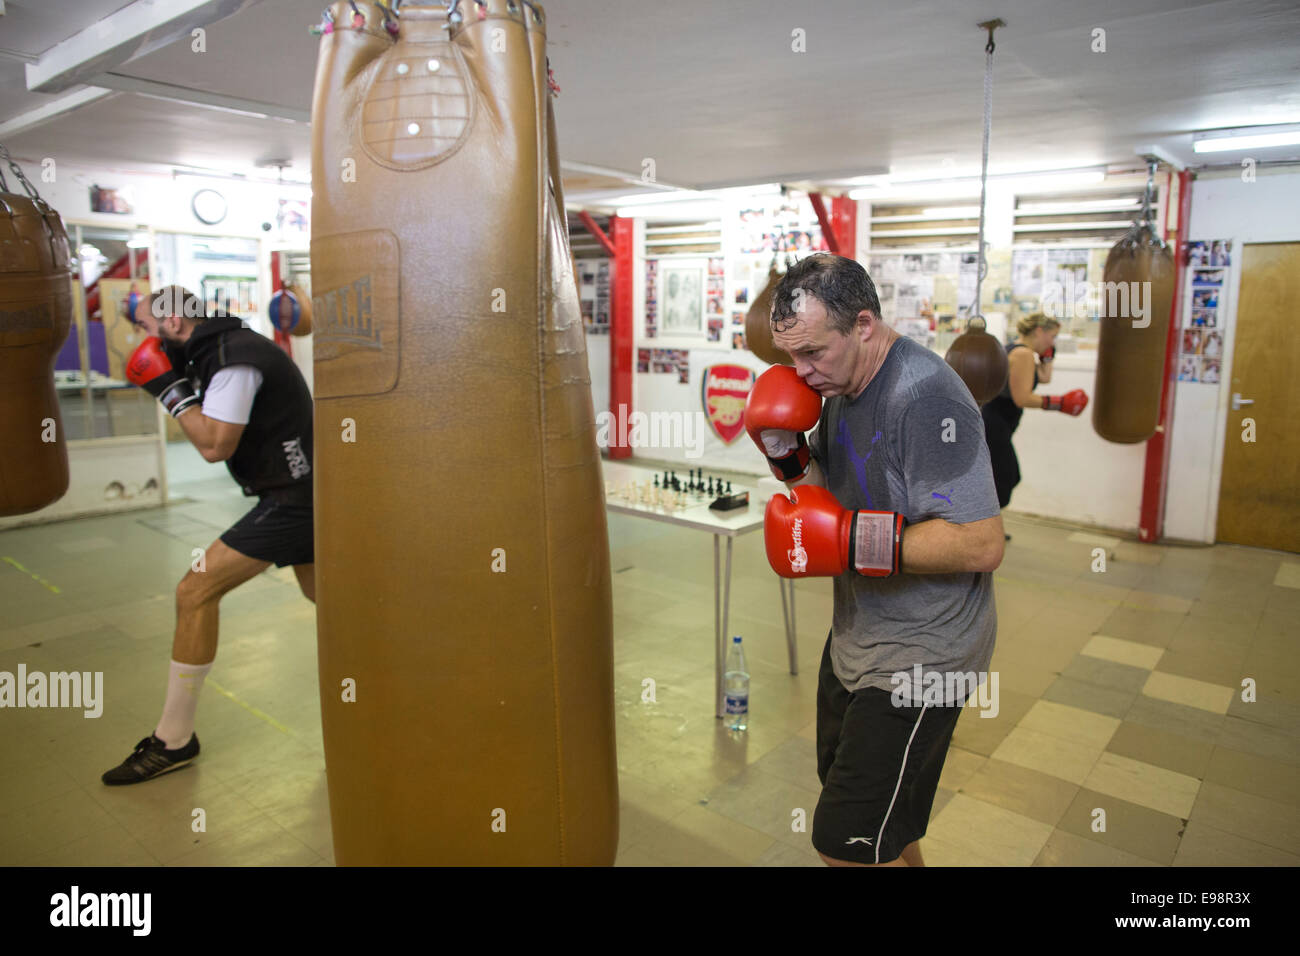 Chessboxing, amateur boxing and chess board game being played alternately  as part of a new surreal sport, Islington, London, UK Stock Photo - Alamy